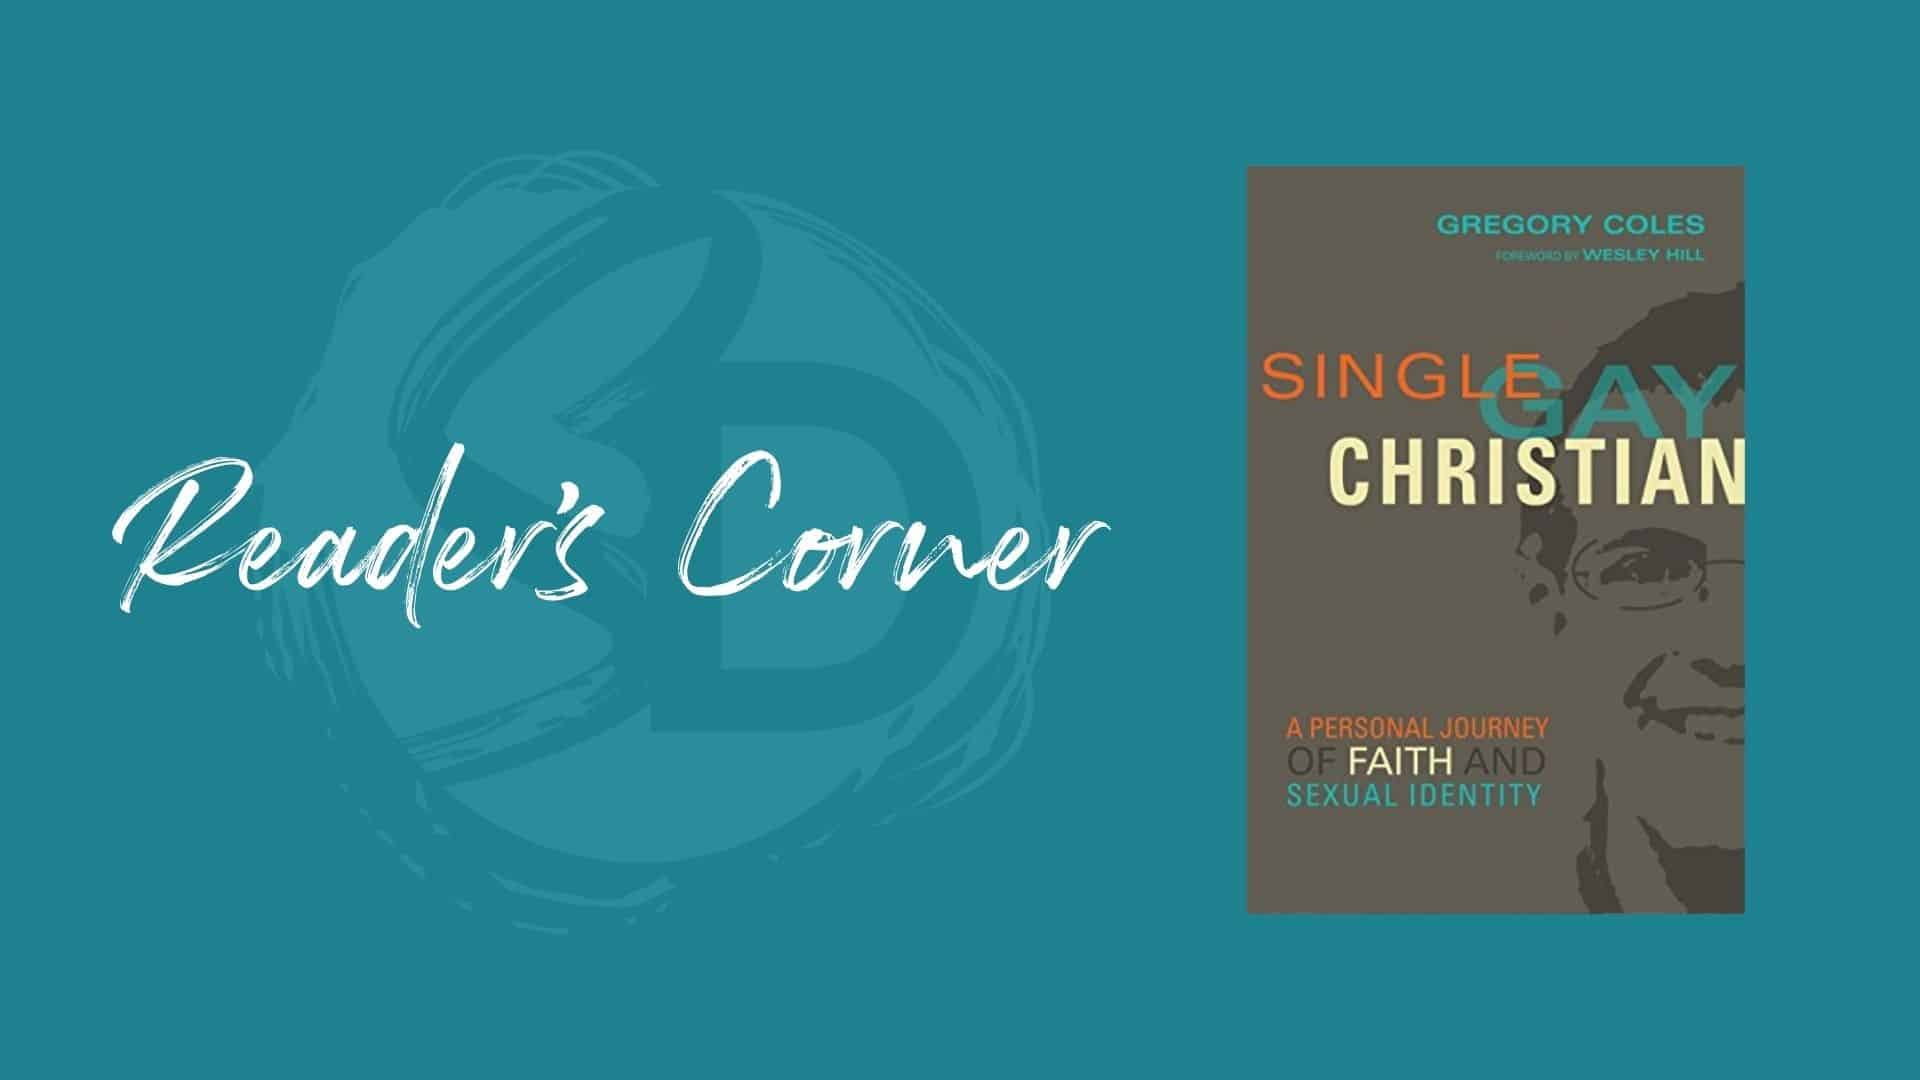 Reader’s Corner: “Single, Gay, Christian” by Gregory Coles